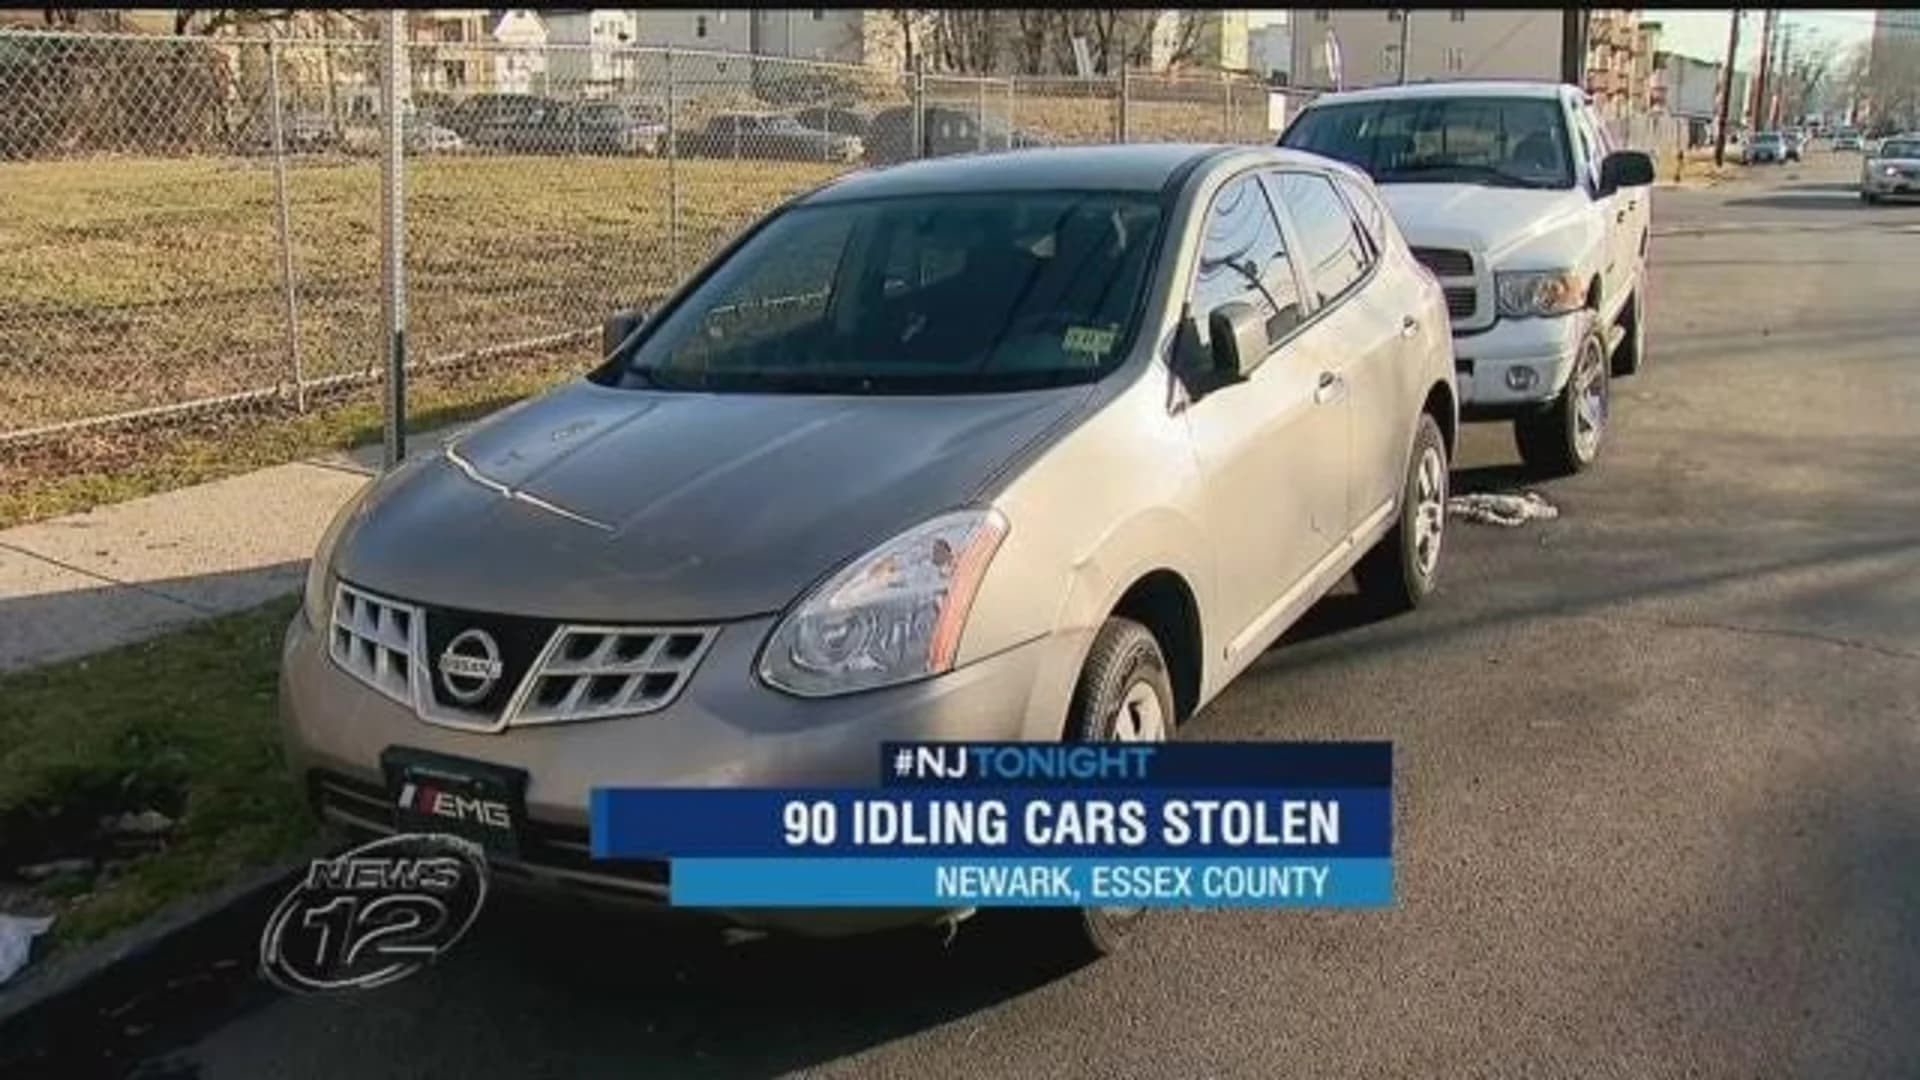 Police warn drivers not to leave cars idling amid rash of thefts